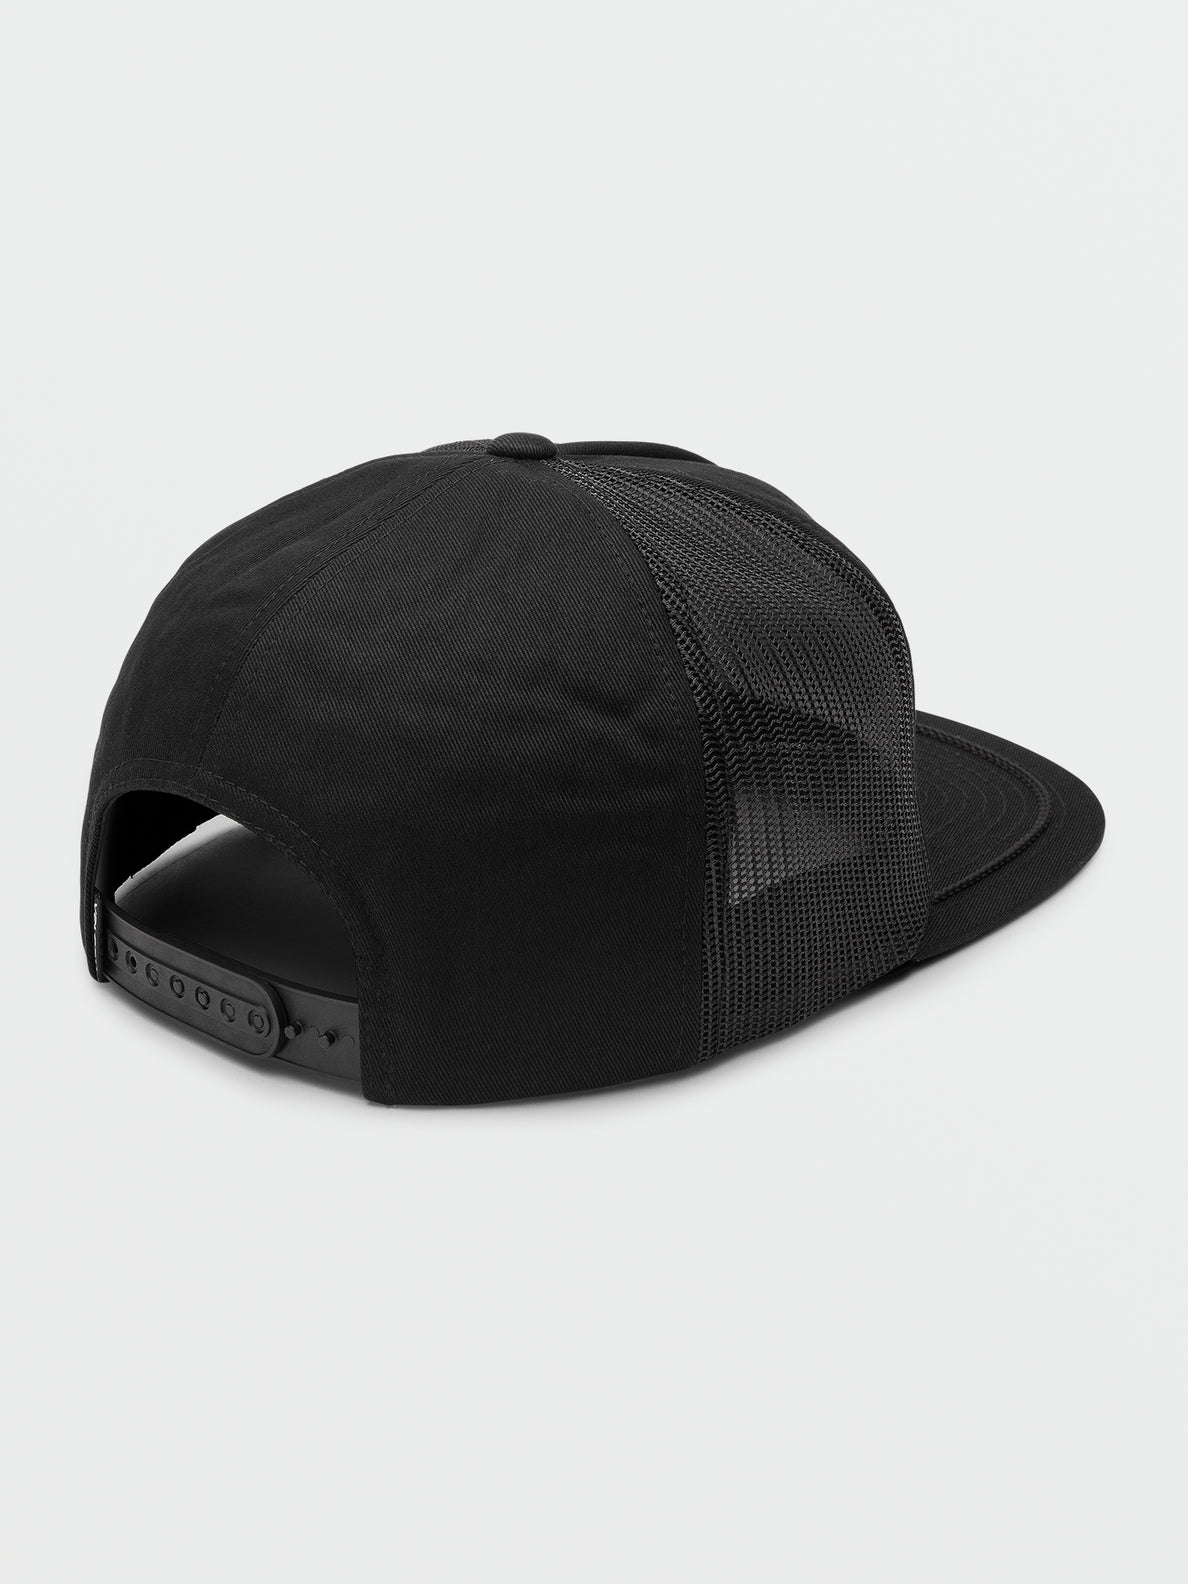 Crate Freight Cheese Hat - Black (D5542216_BLK) [B]